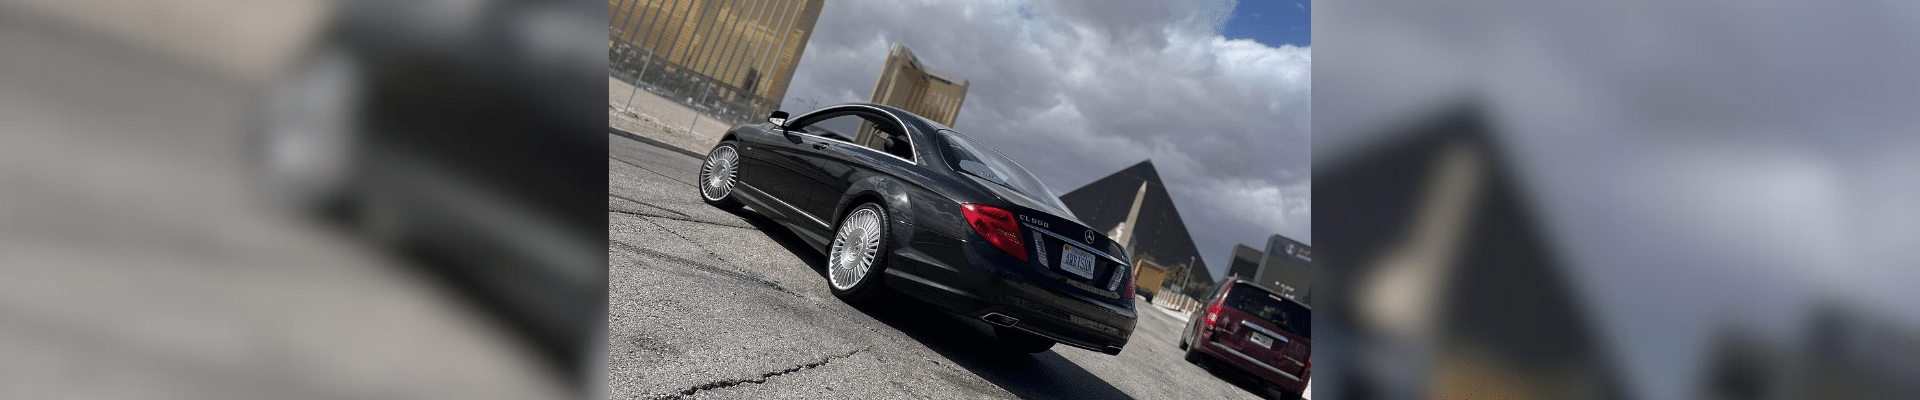 Mercedes Benz CL550 Gallery img 2